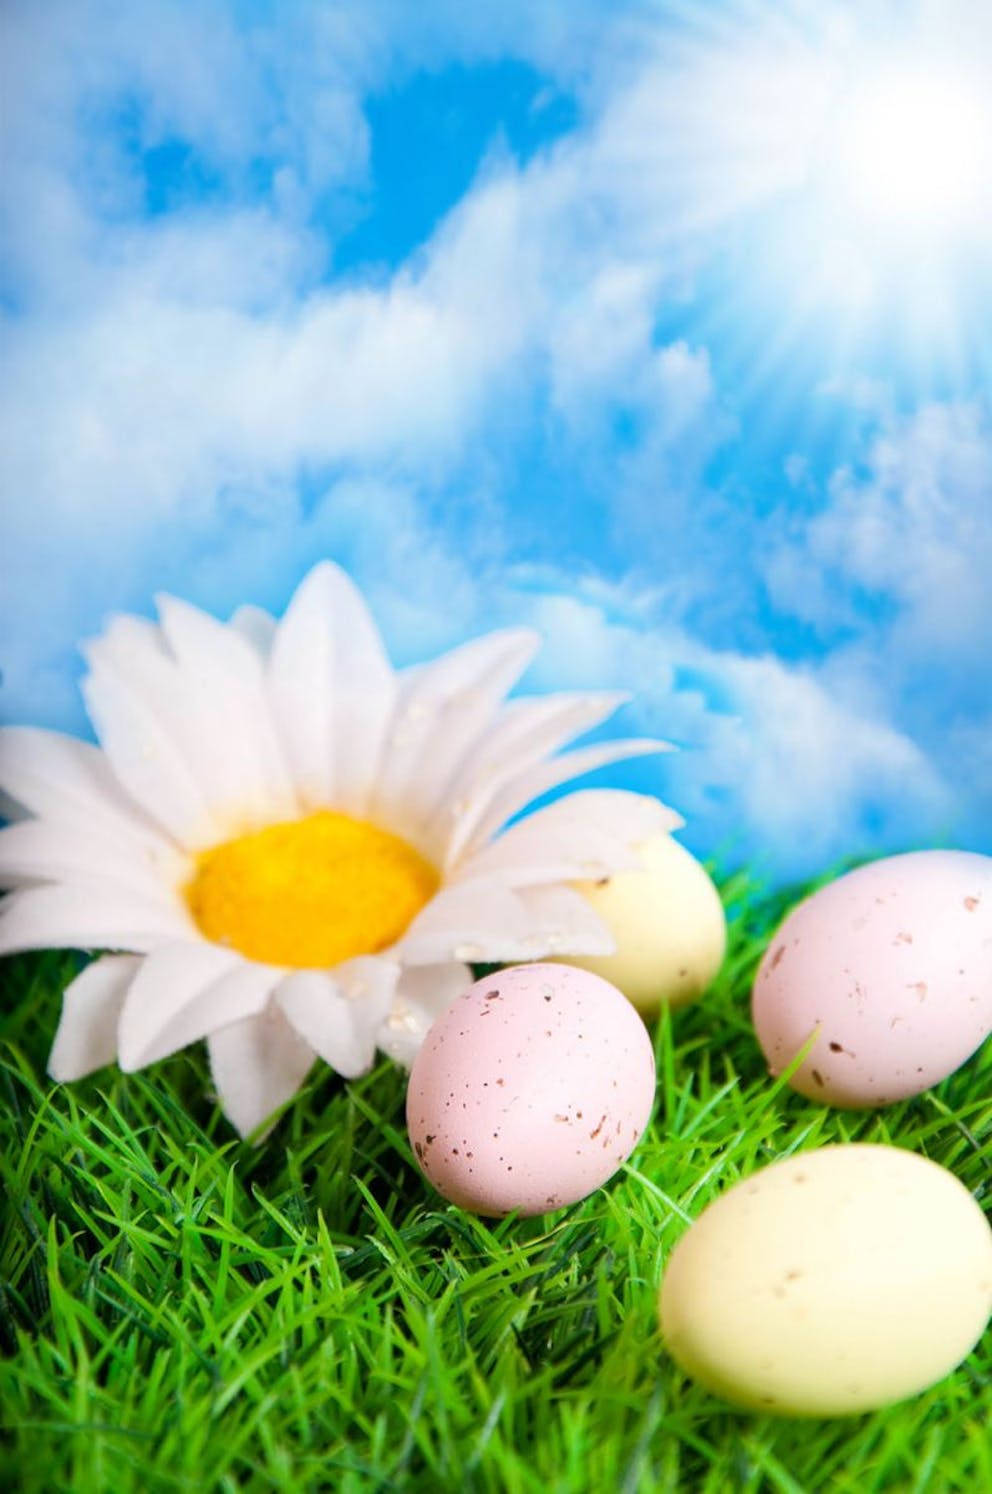 A picture of eggs on grass under blue sky